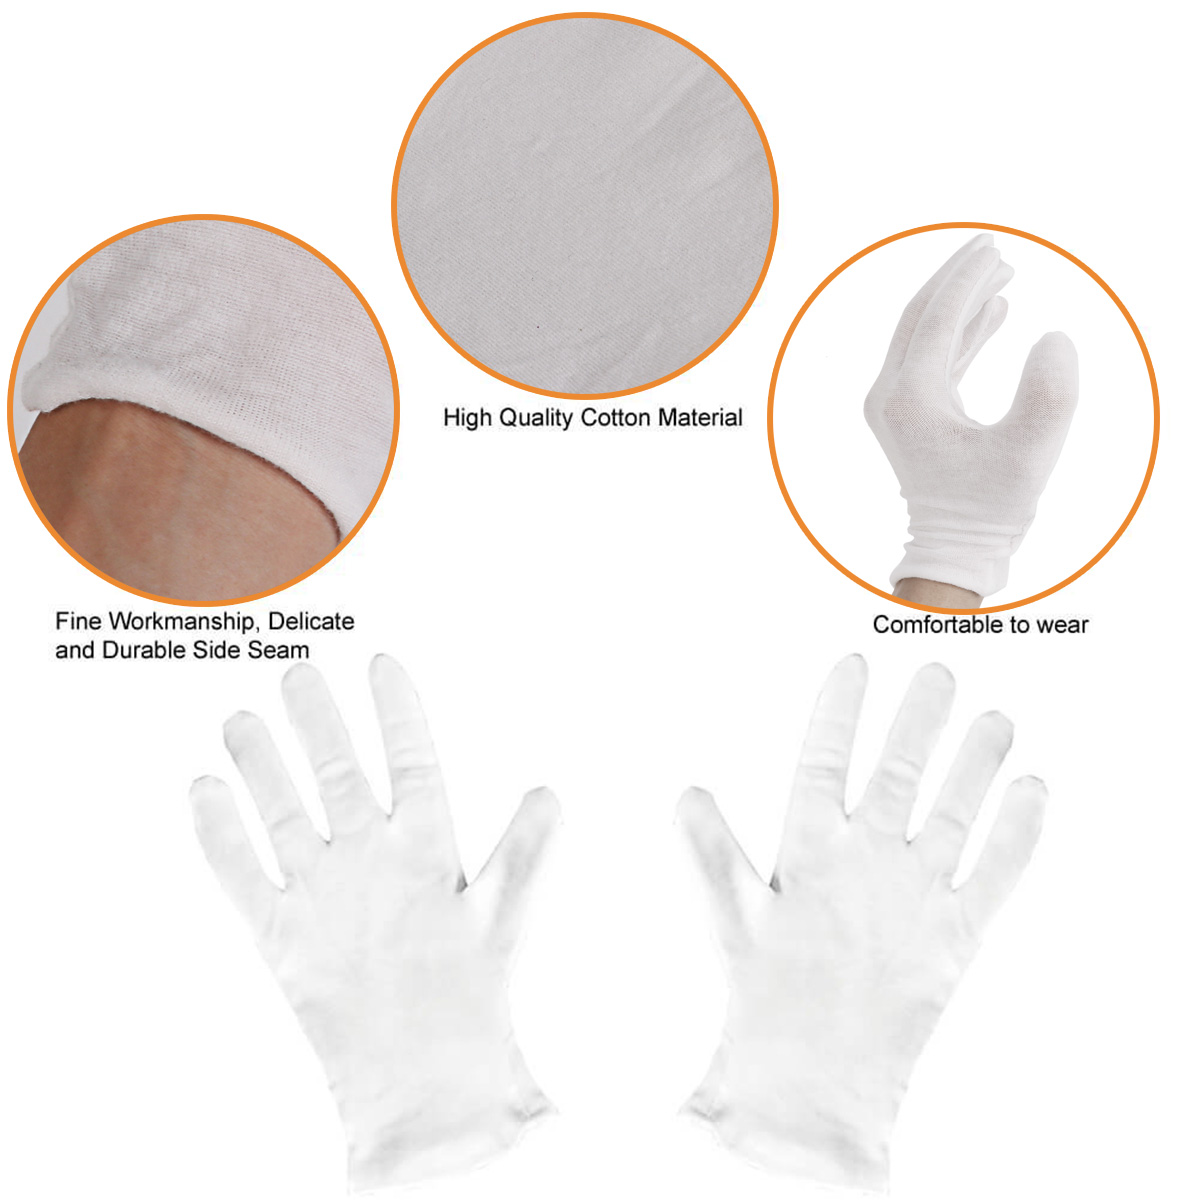 12 Pairs White Thin Reusable Elastic Soft Cotton Gloves Dry Hands Moisturizing Cosmetic Hand Spa Coin Jewelry Inspection Glove